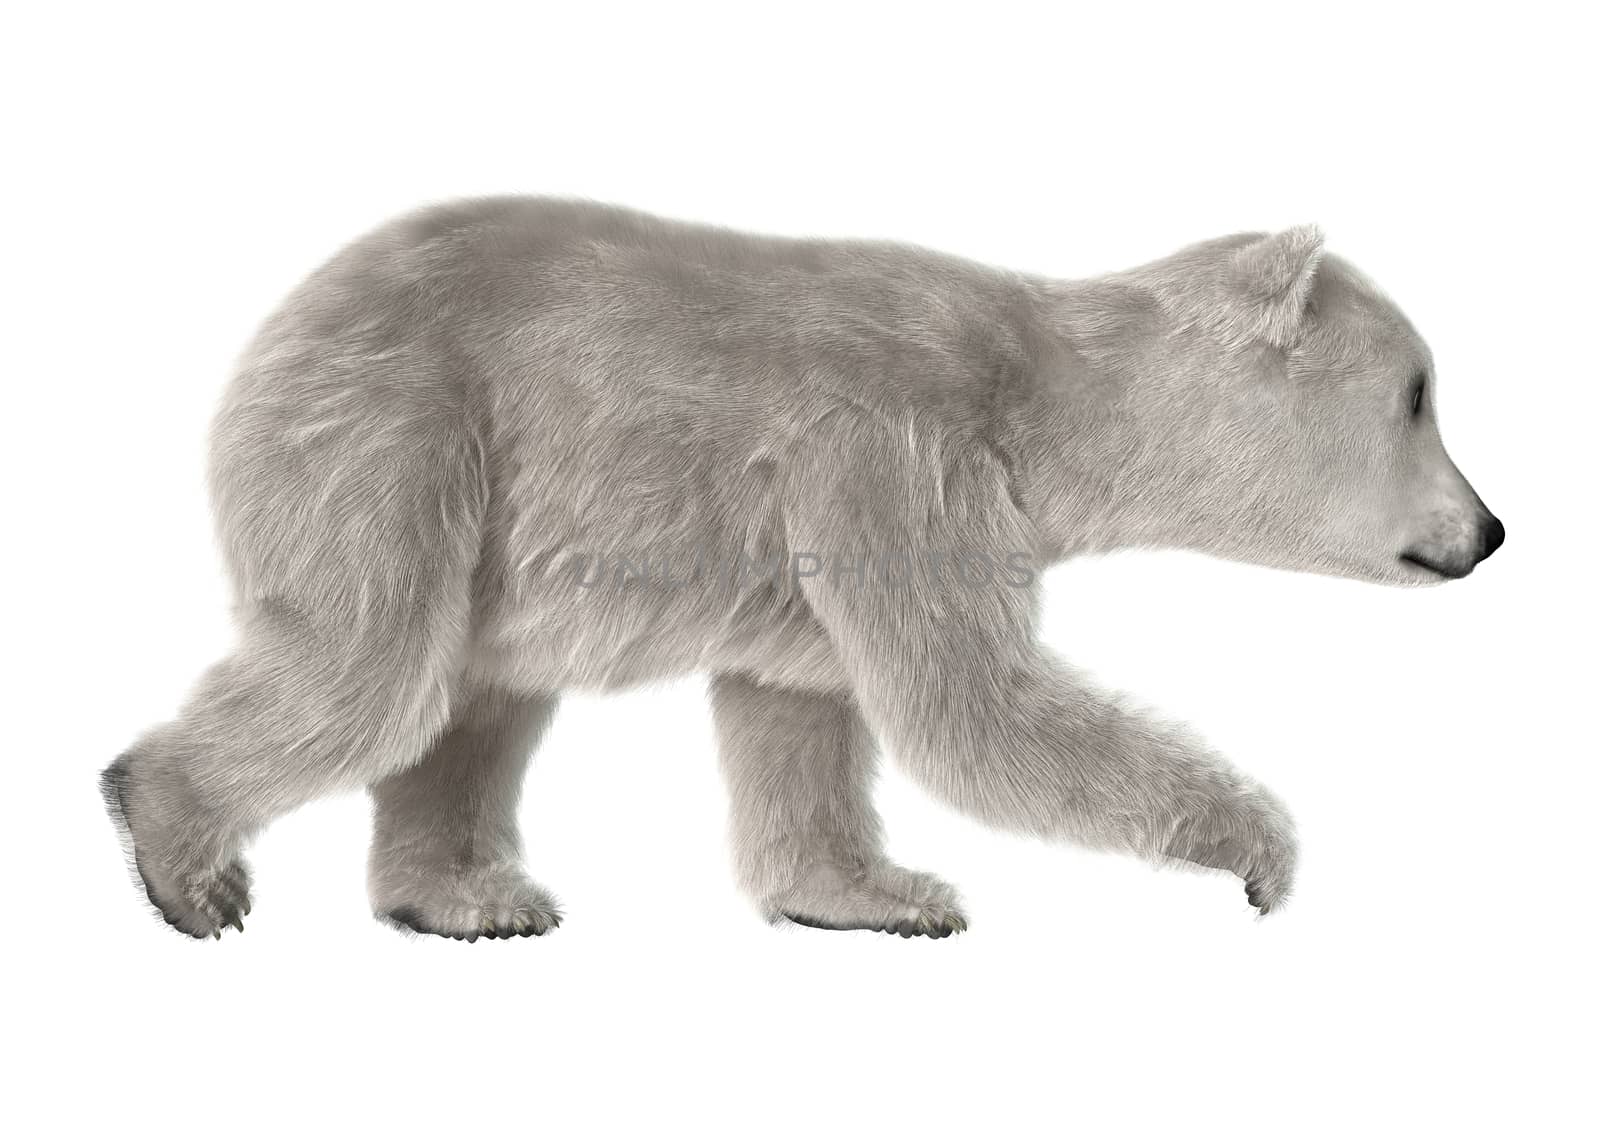 3D digital render of a polar bear cub isolated on white background